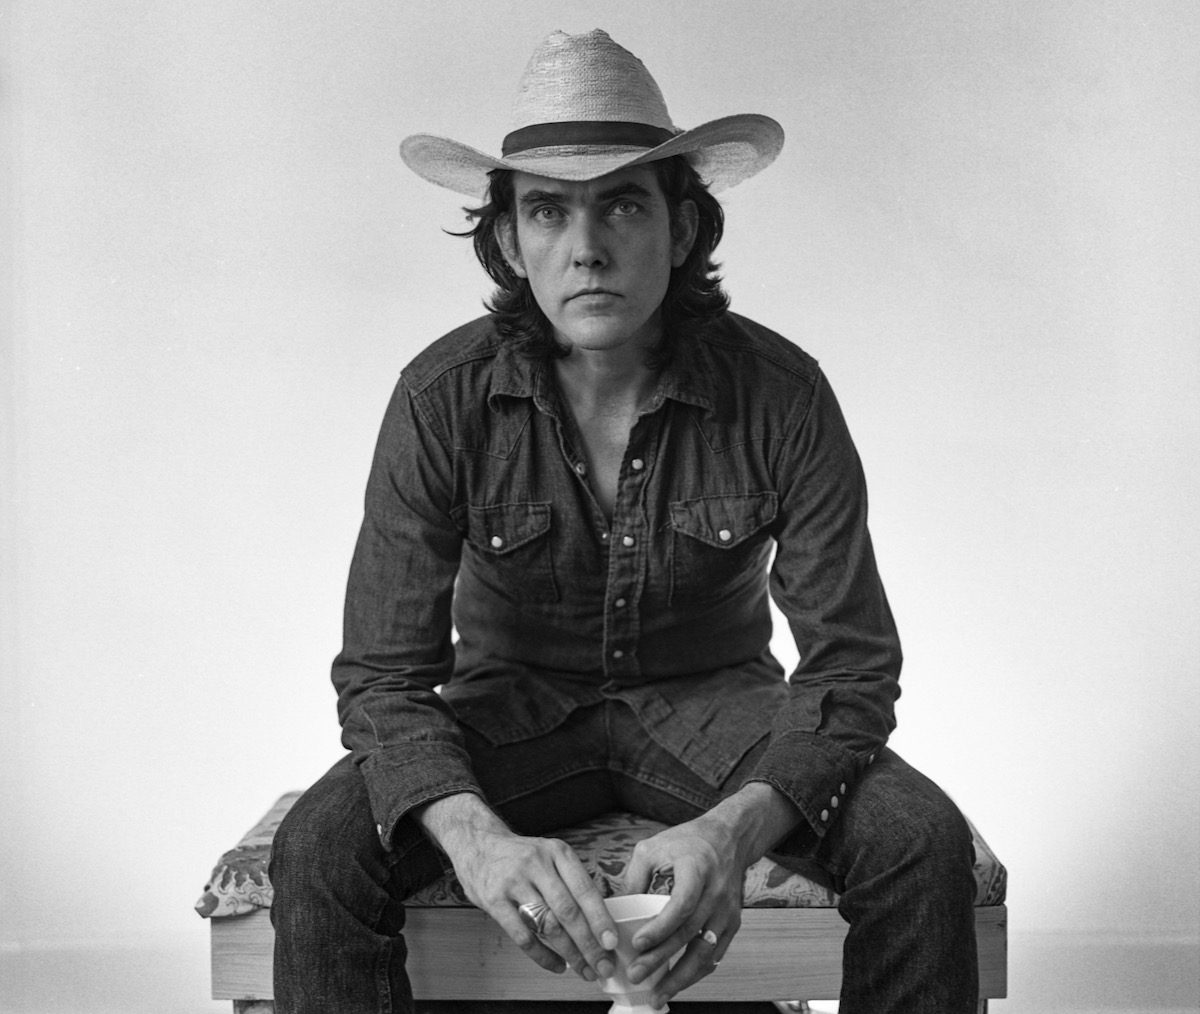 A portrait of a young Guy Clark